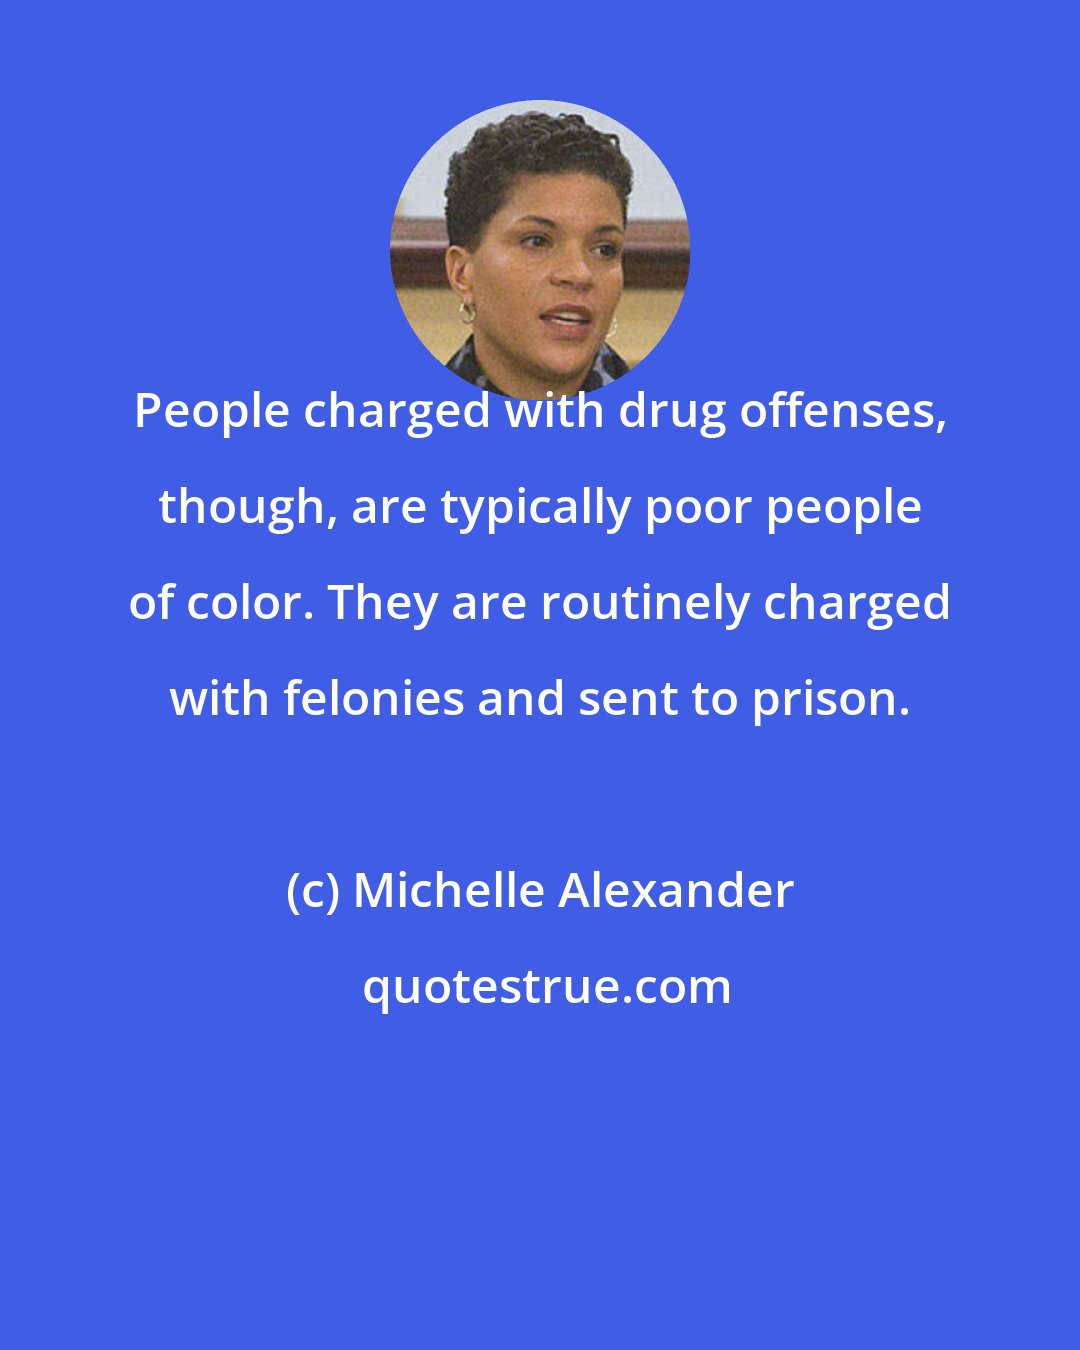 Michelle Alexander: People charged with drug offenses, though, are typically poor people of color. They are routinely charged with felonies and sent to prison.